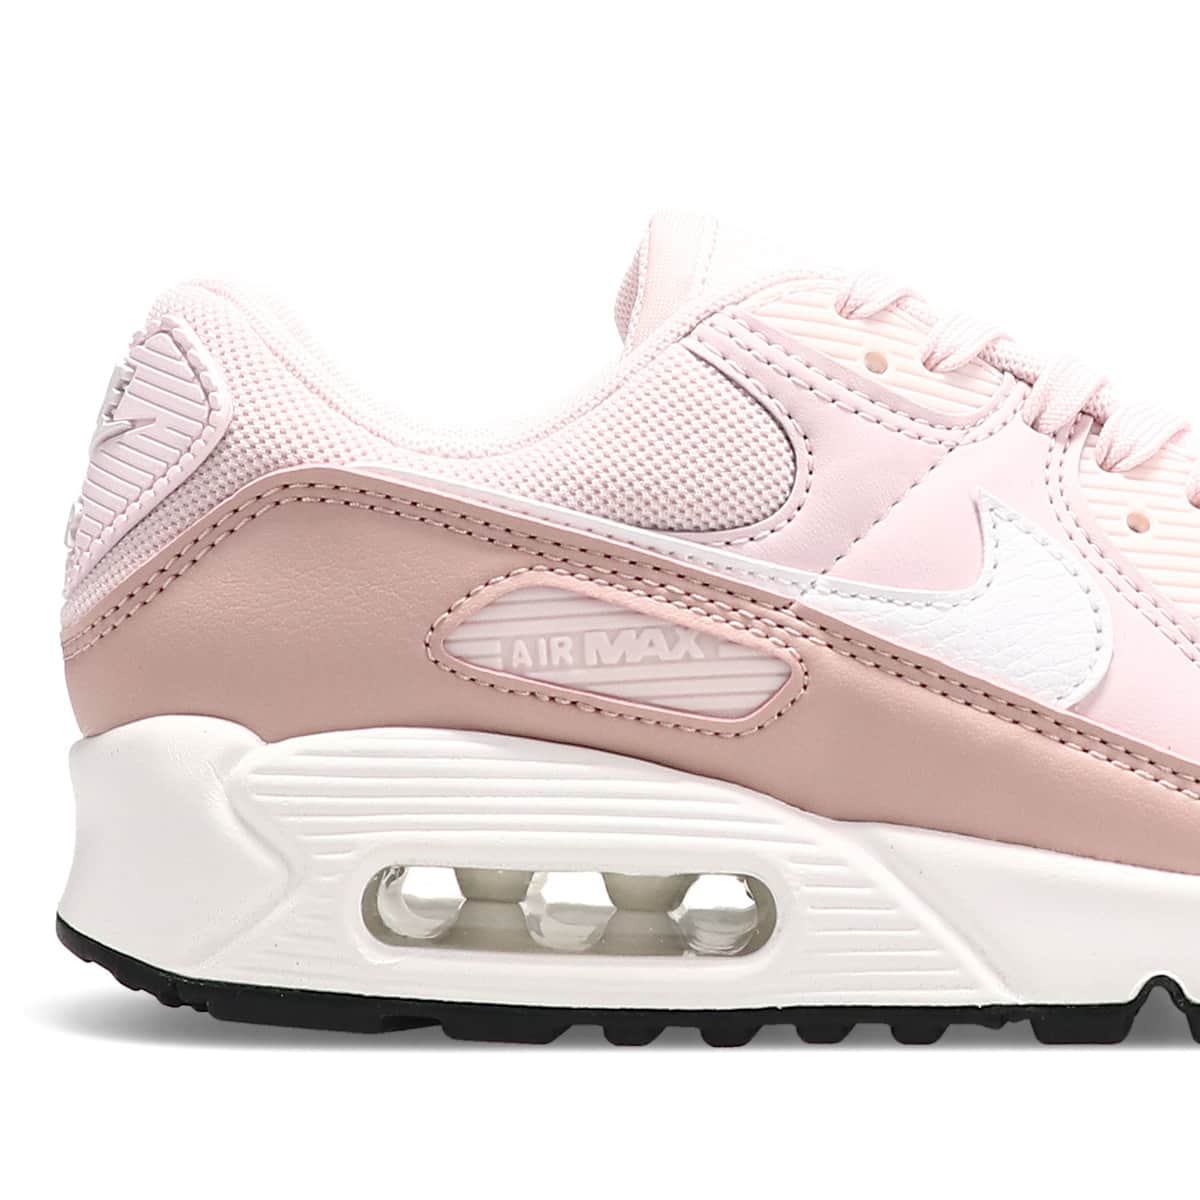 NIKE WMNS AIR MAX 90 BARELY ROSE/SUMMIT WHITE-PINK OXFORD 23FA-I